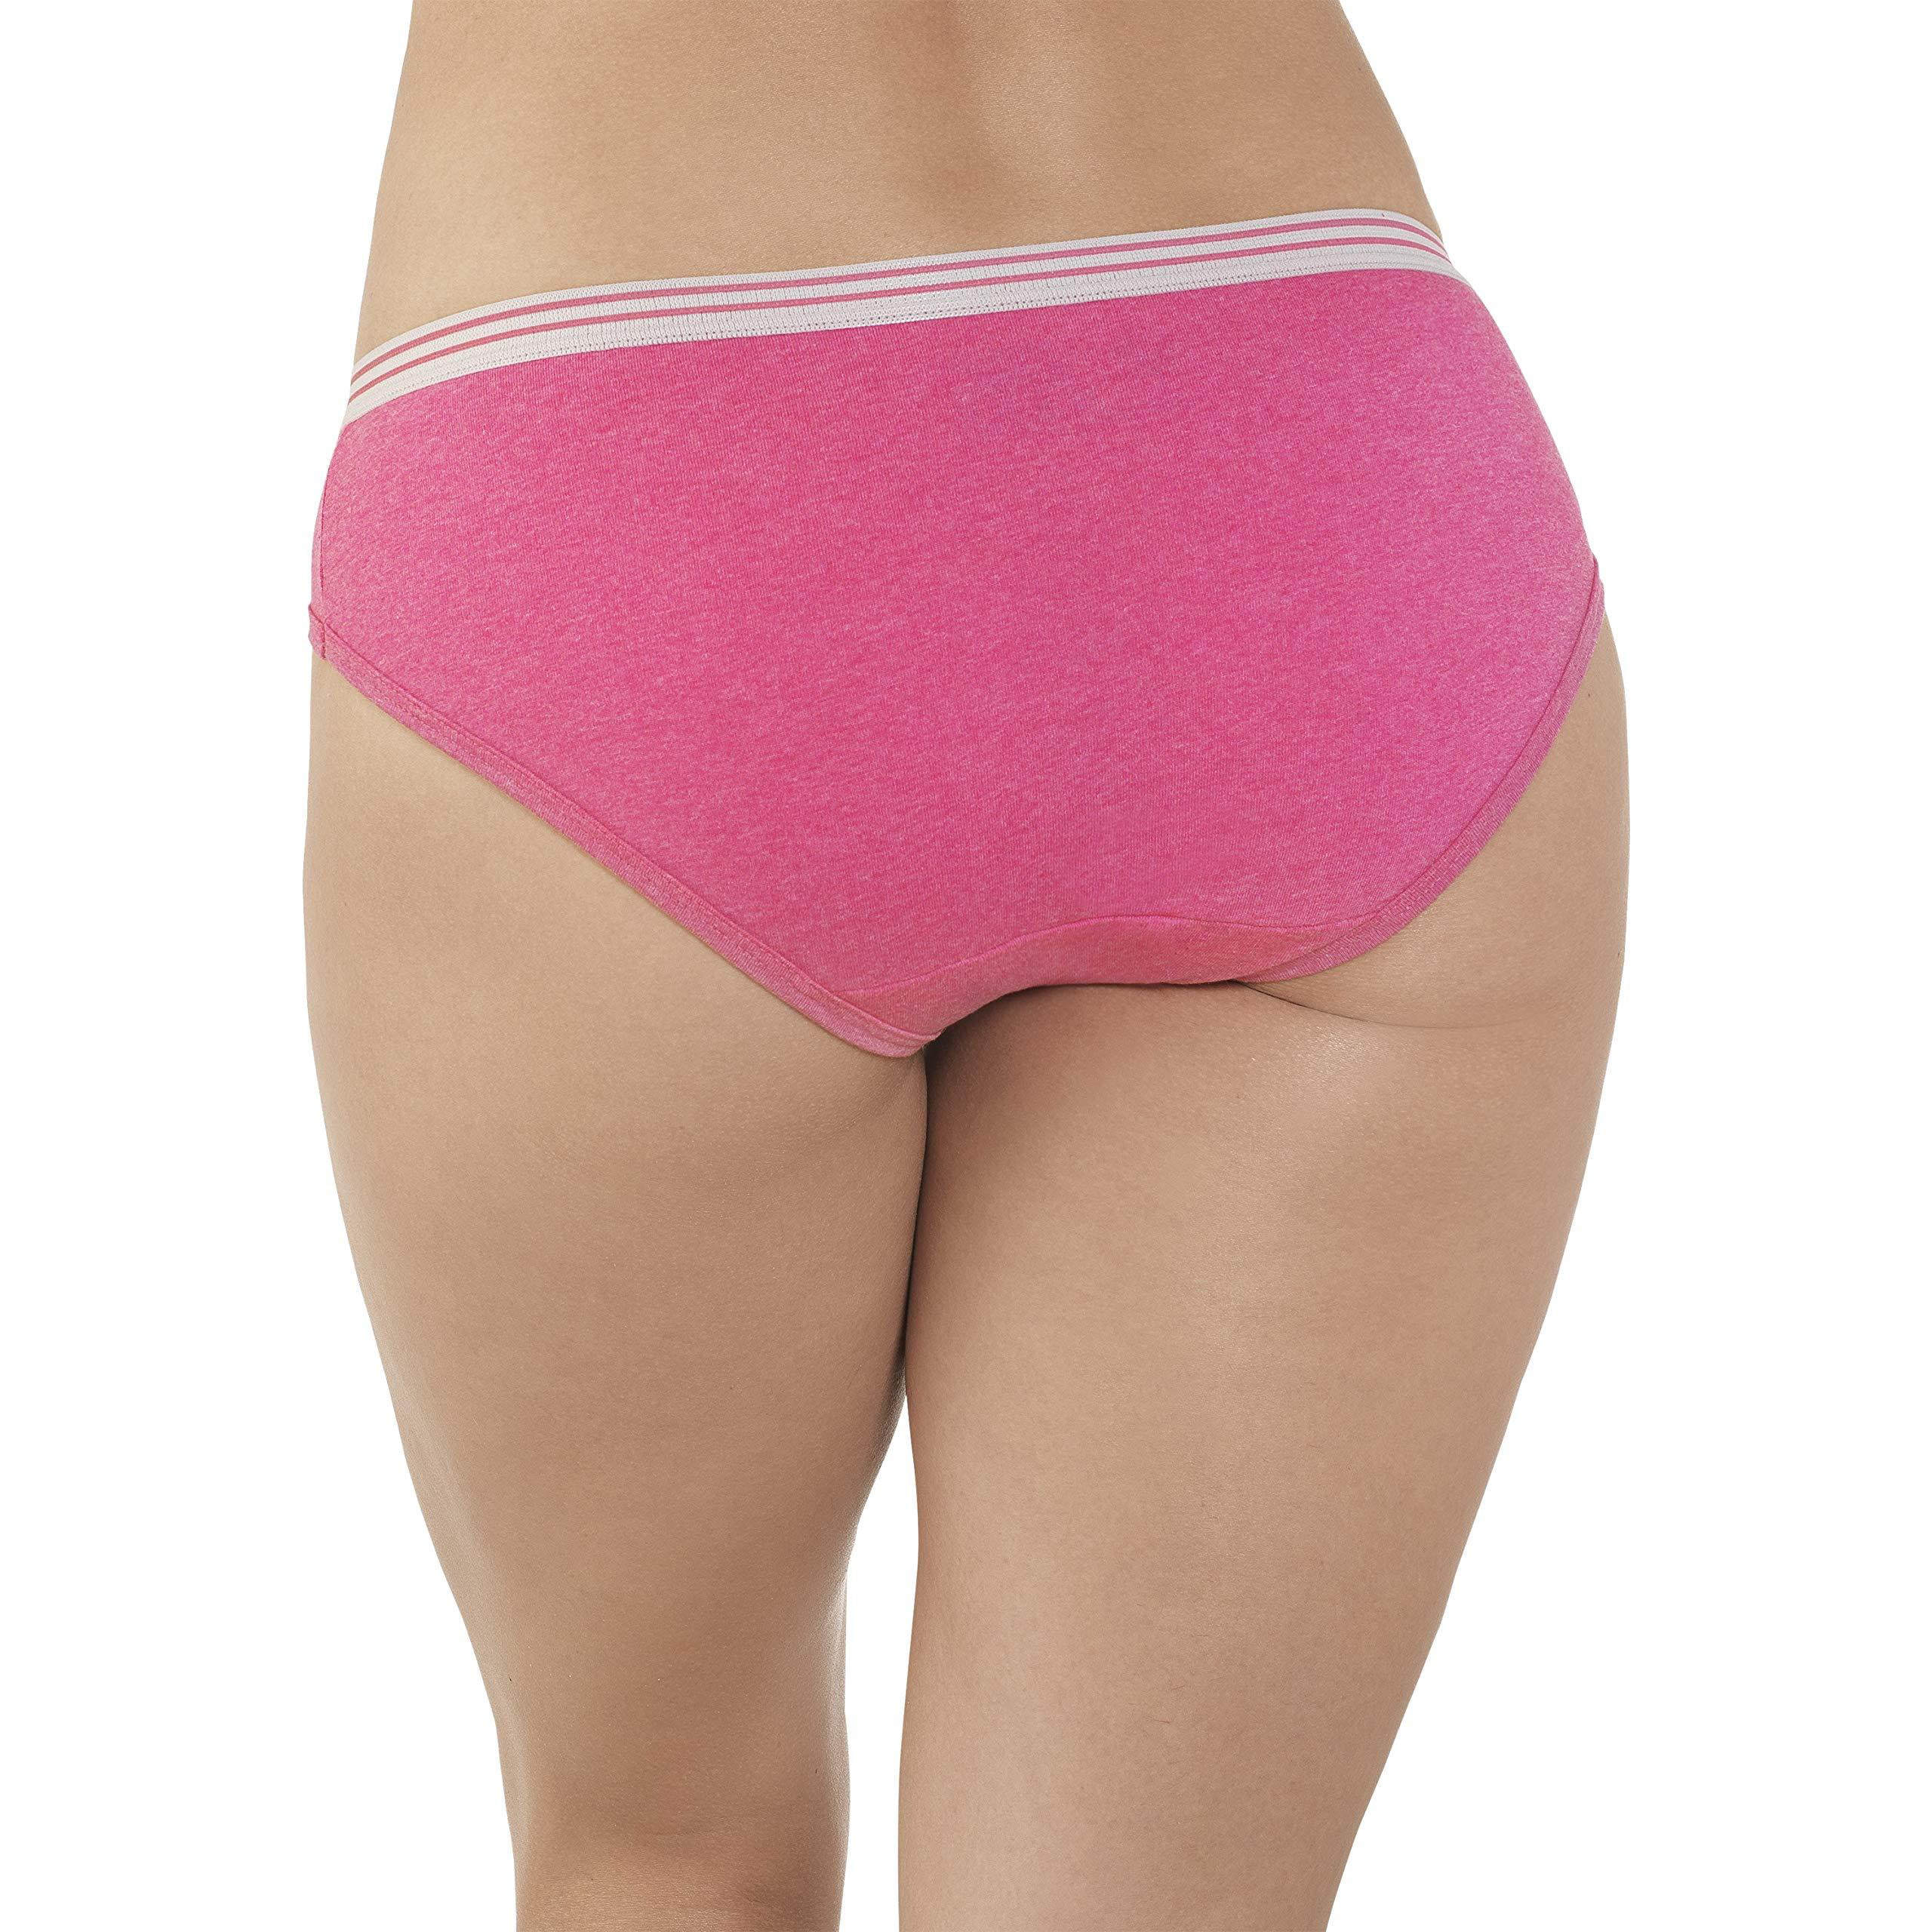 Women's Heather Low Rise Brief Panty, 6 Pack ; Sizes 5-8 